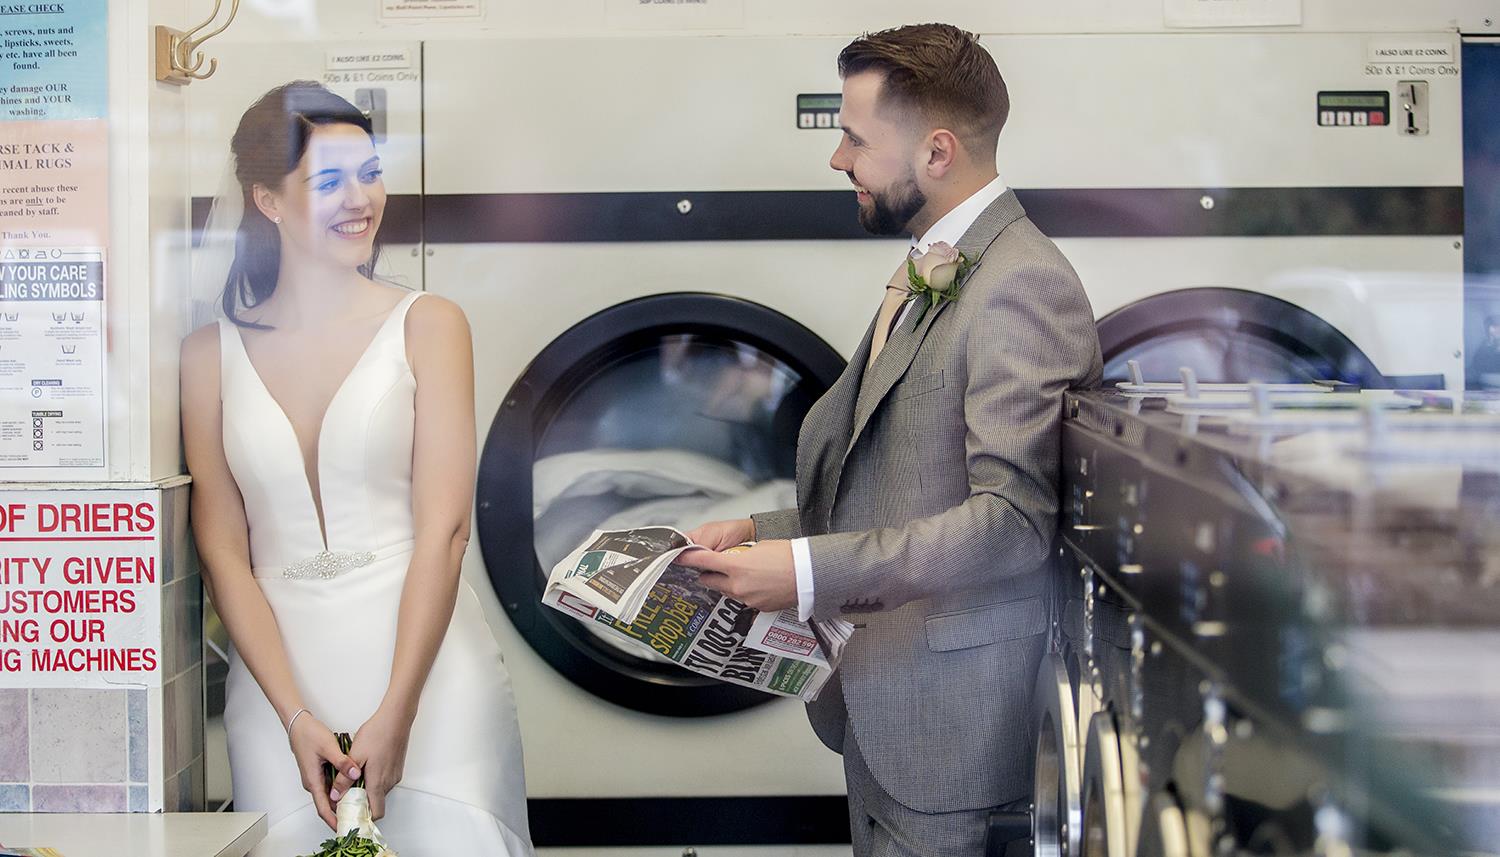 Waiting at the laundromat. Photo Credit: Shell Sperling Photography